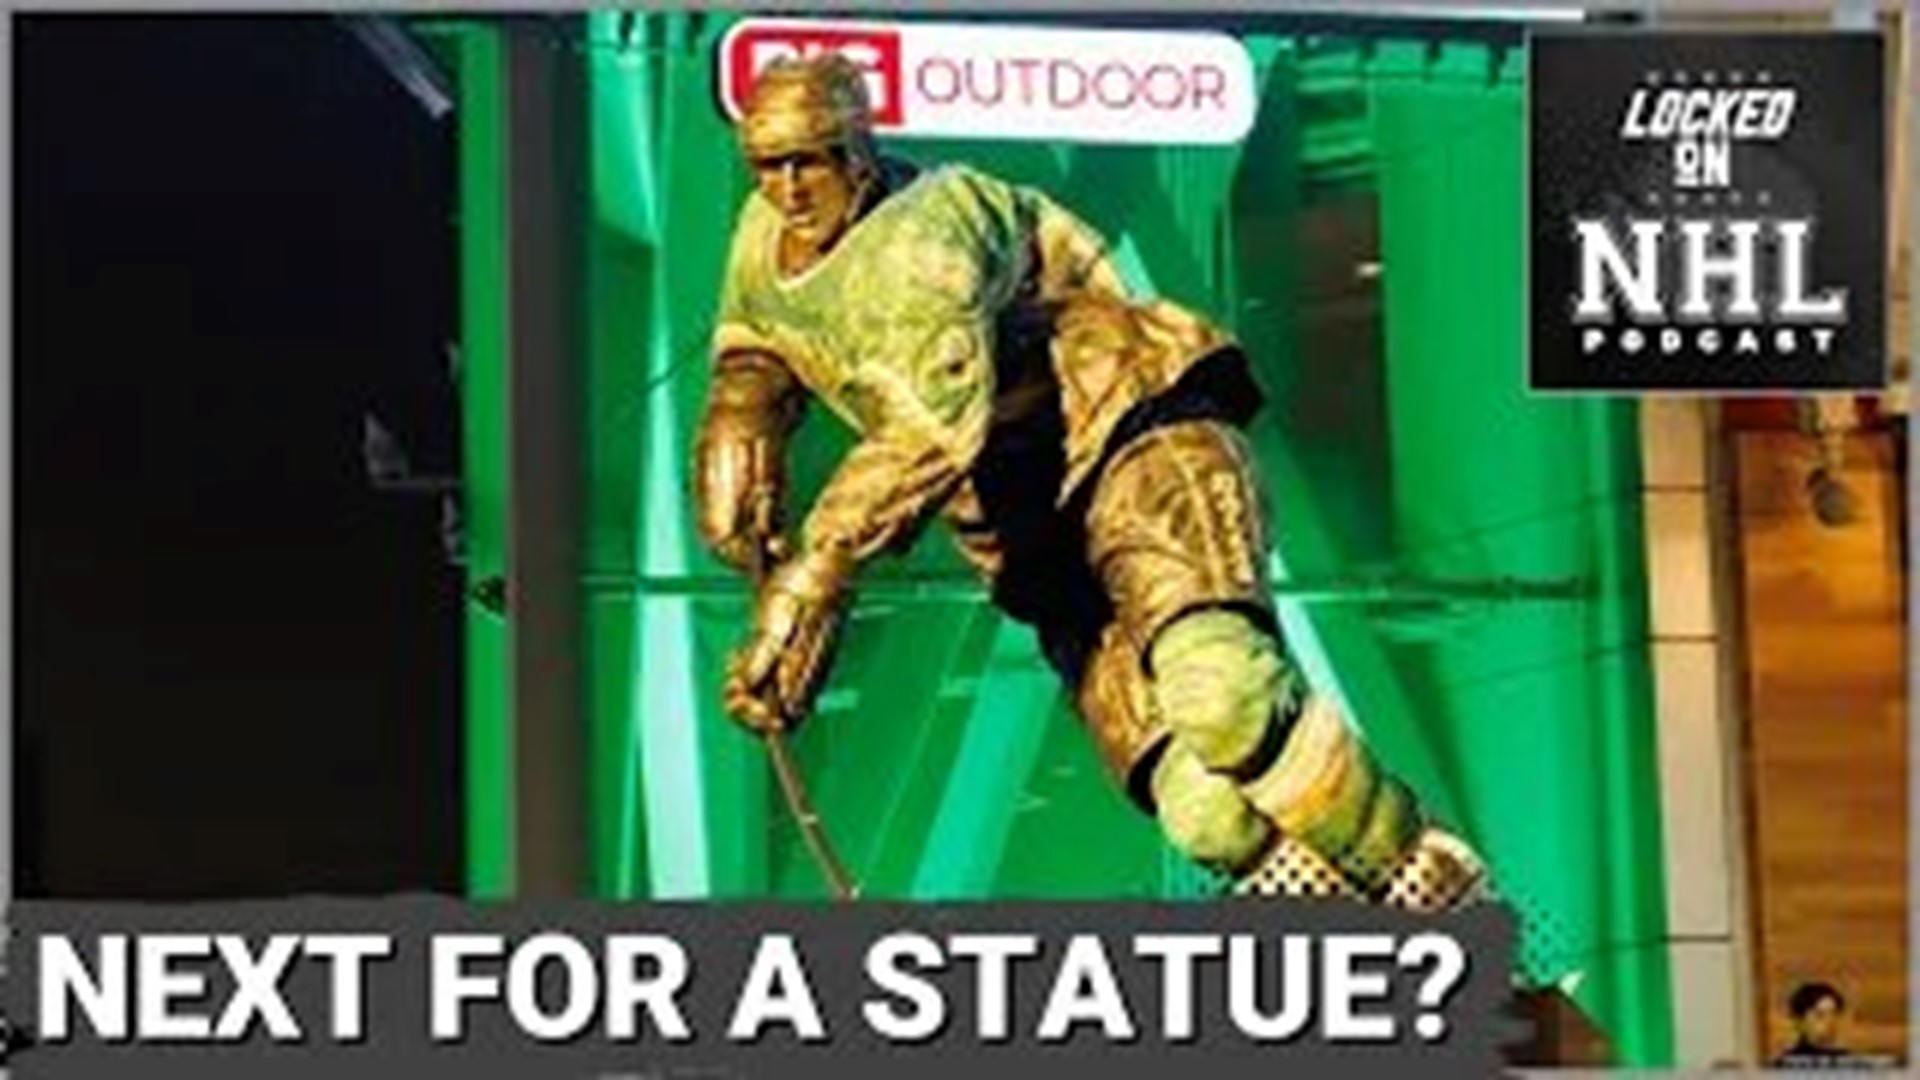 On today's episode of Locked on NHL, we discuss which Western Conference Superstars may someday get a statue of their own after Mike Modano had his statue unveiled.